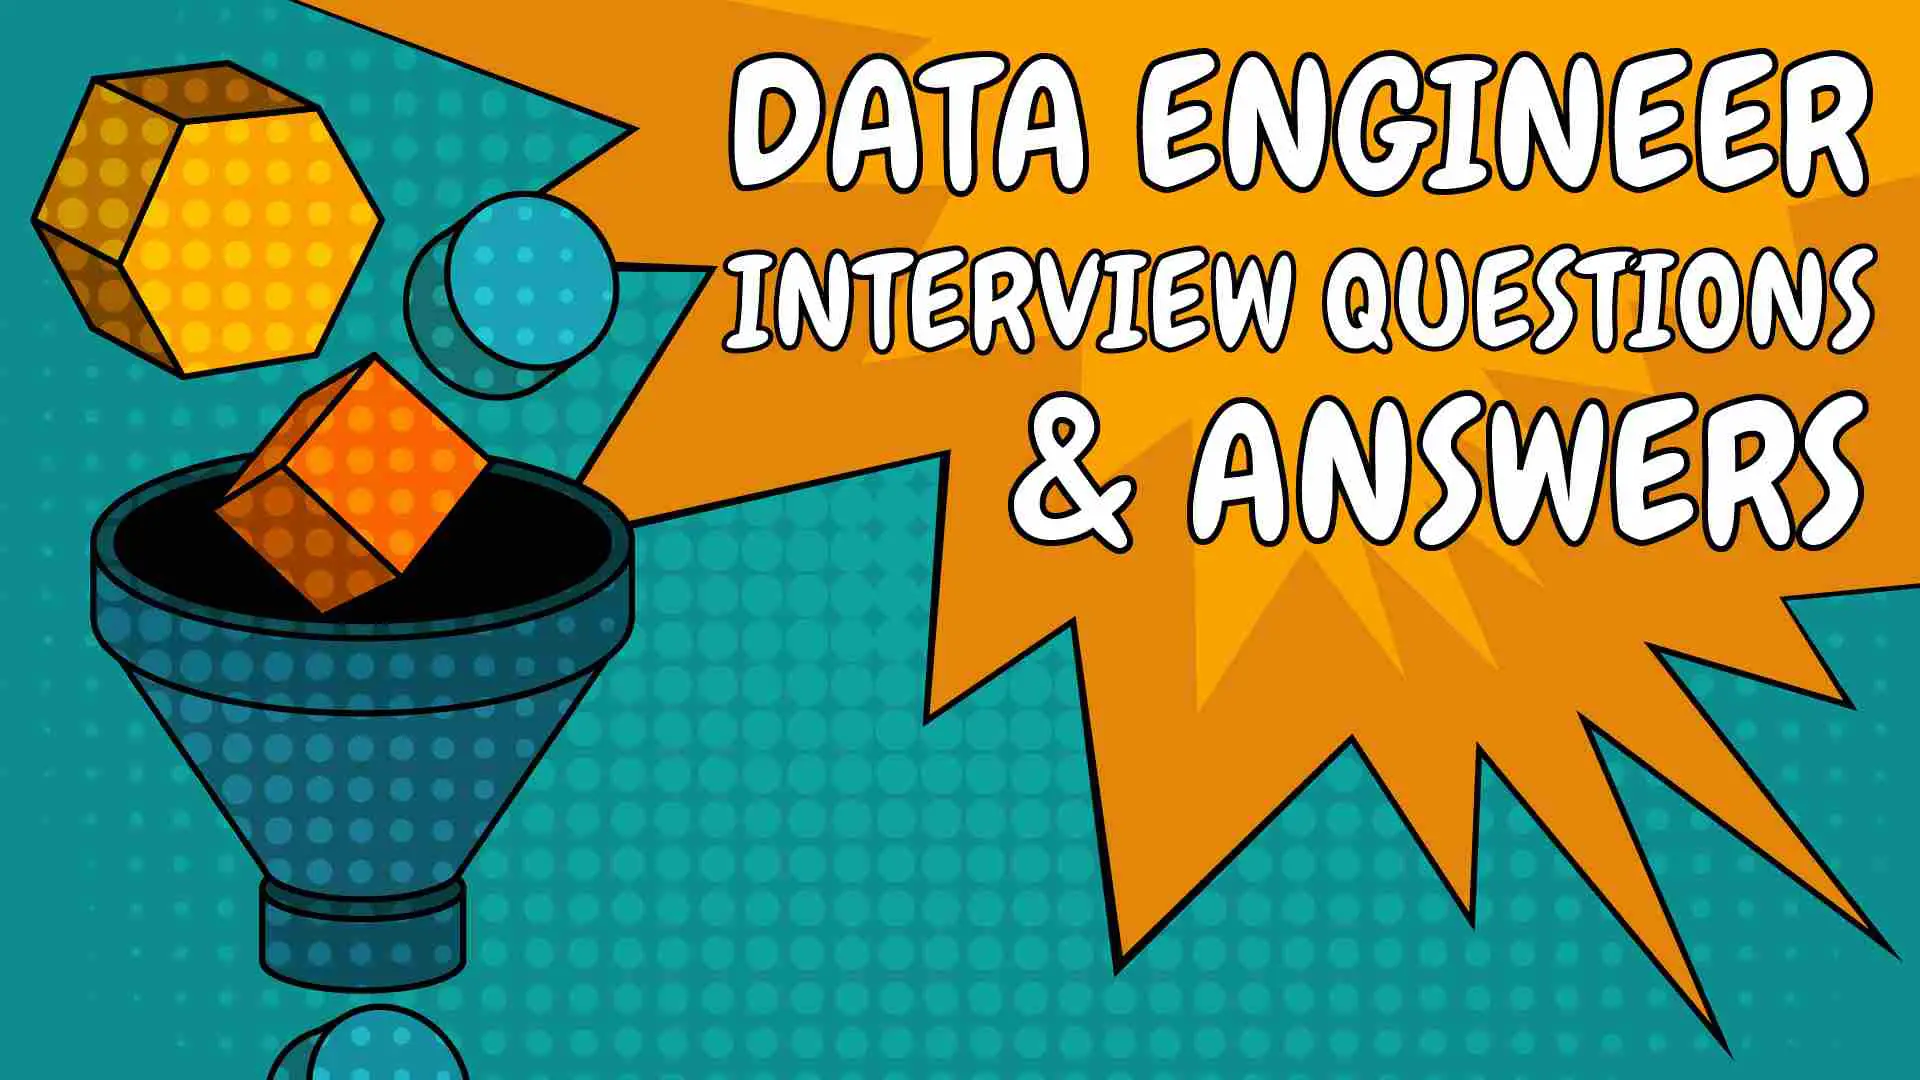 Data Engineer Interview Questions And Answers 2020